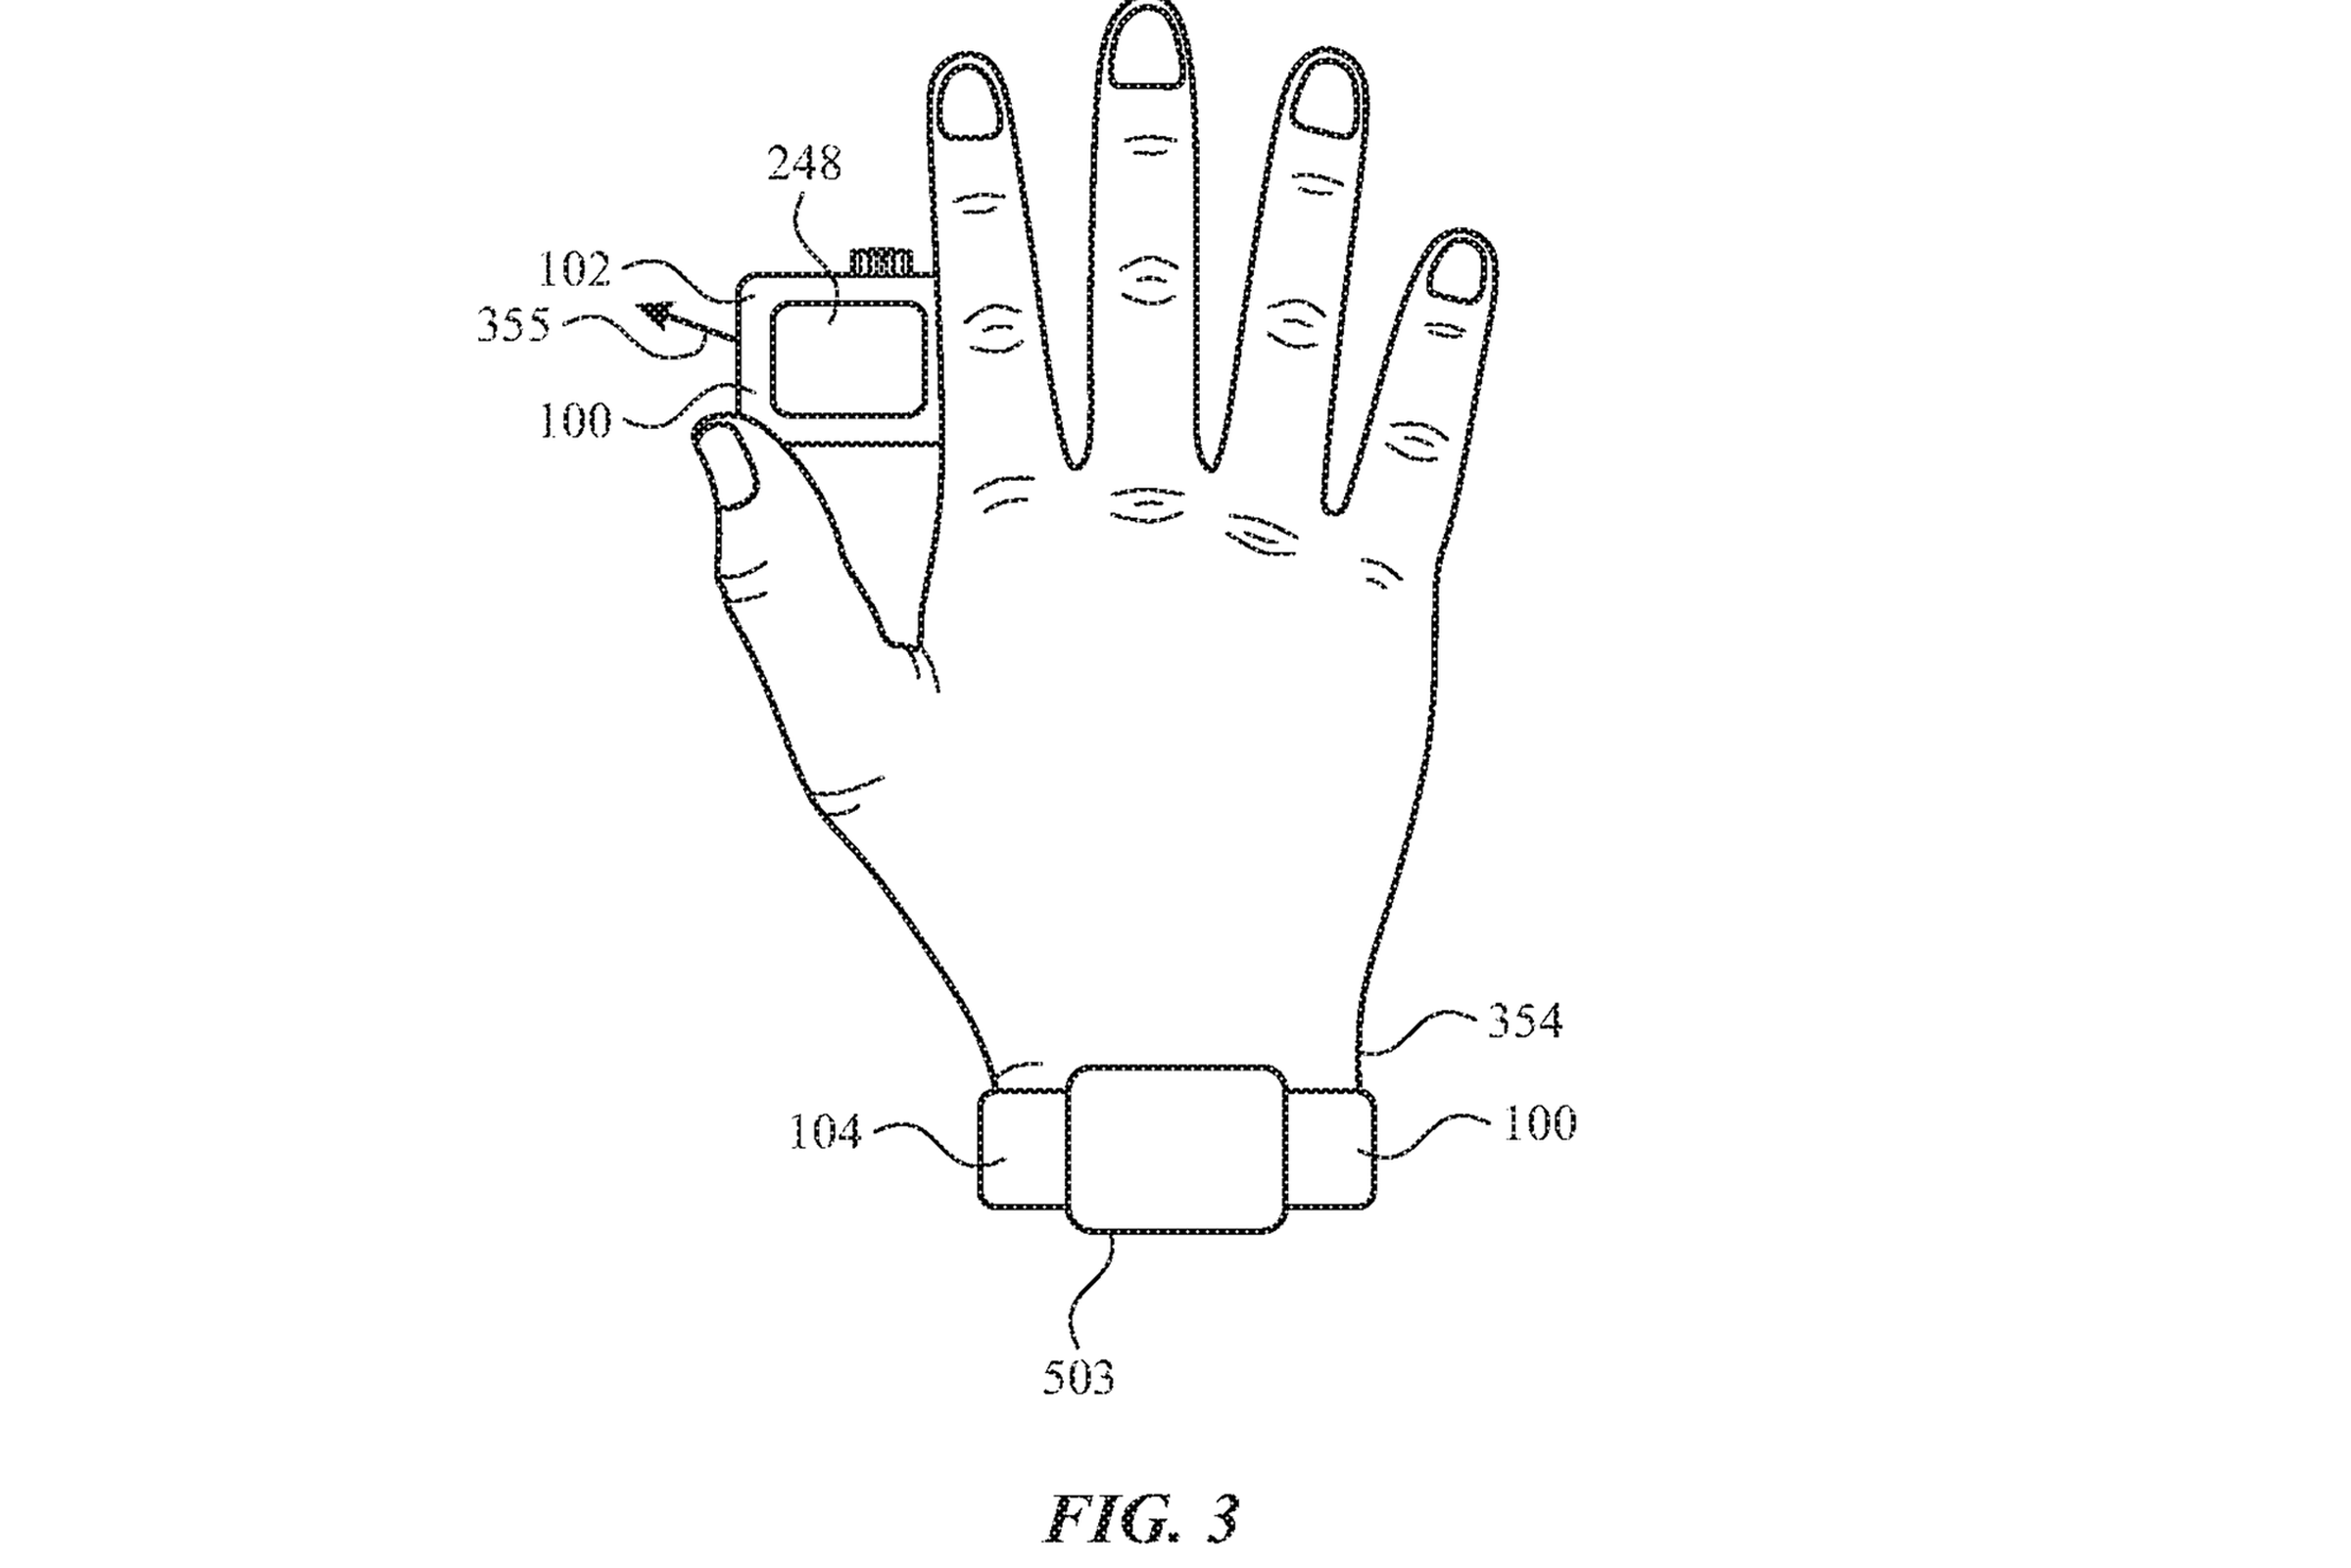 The Figure 3 diagram shows a hand holding up the Apple Watch body while the strap remains on the wrist.